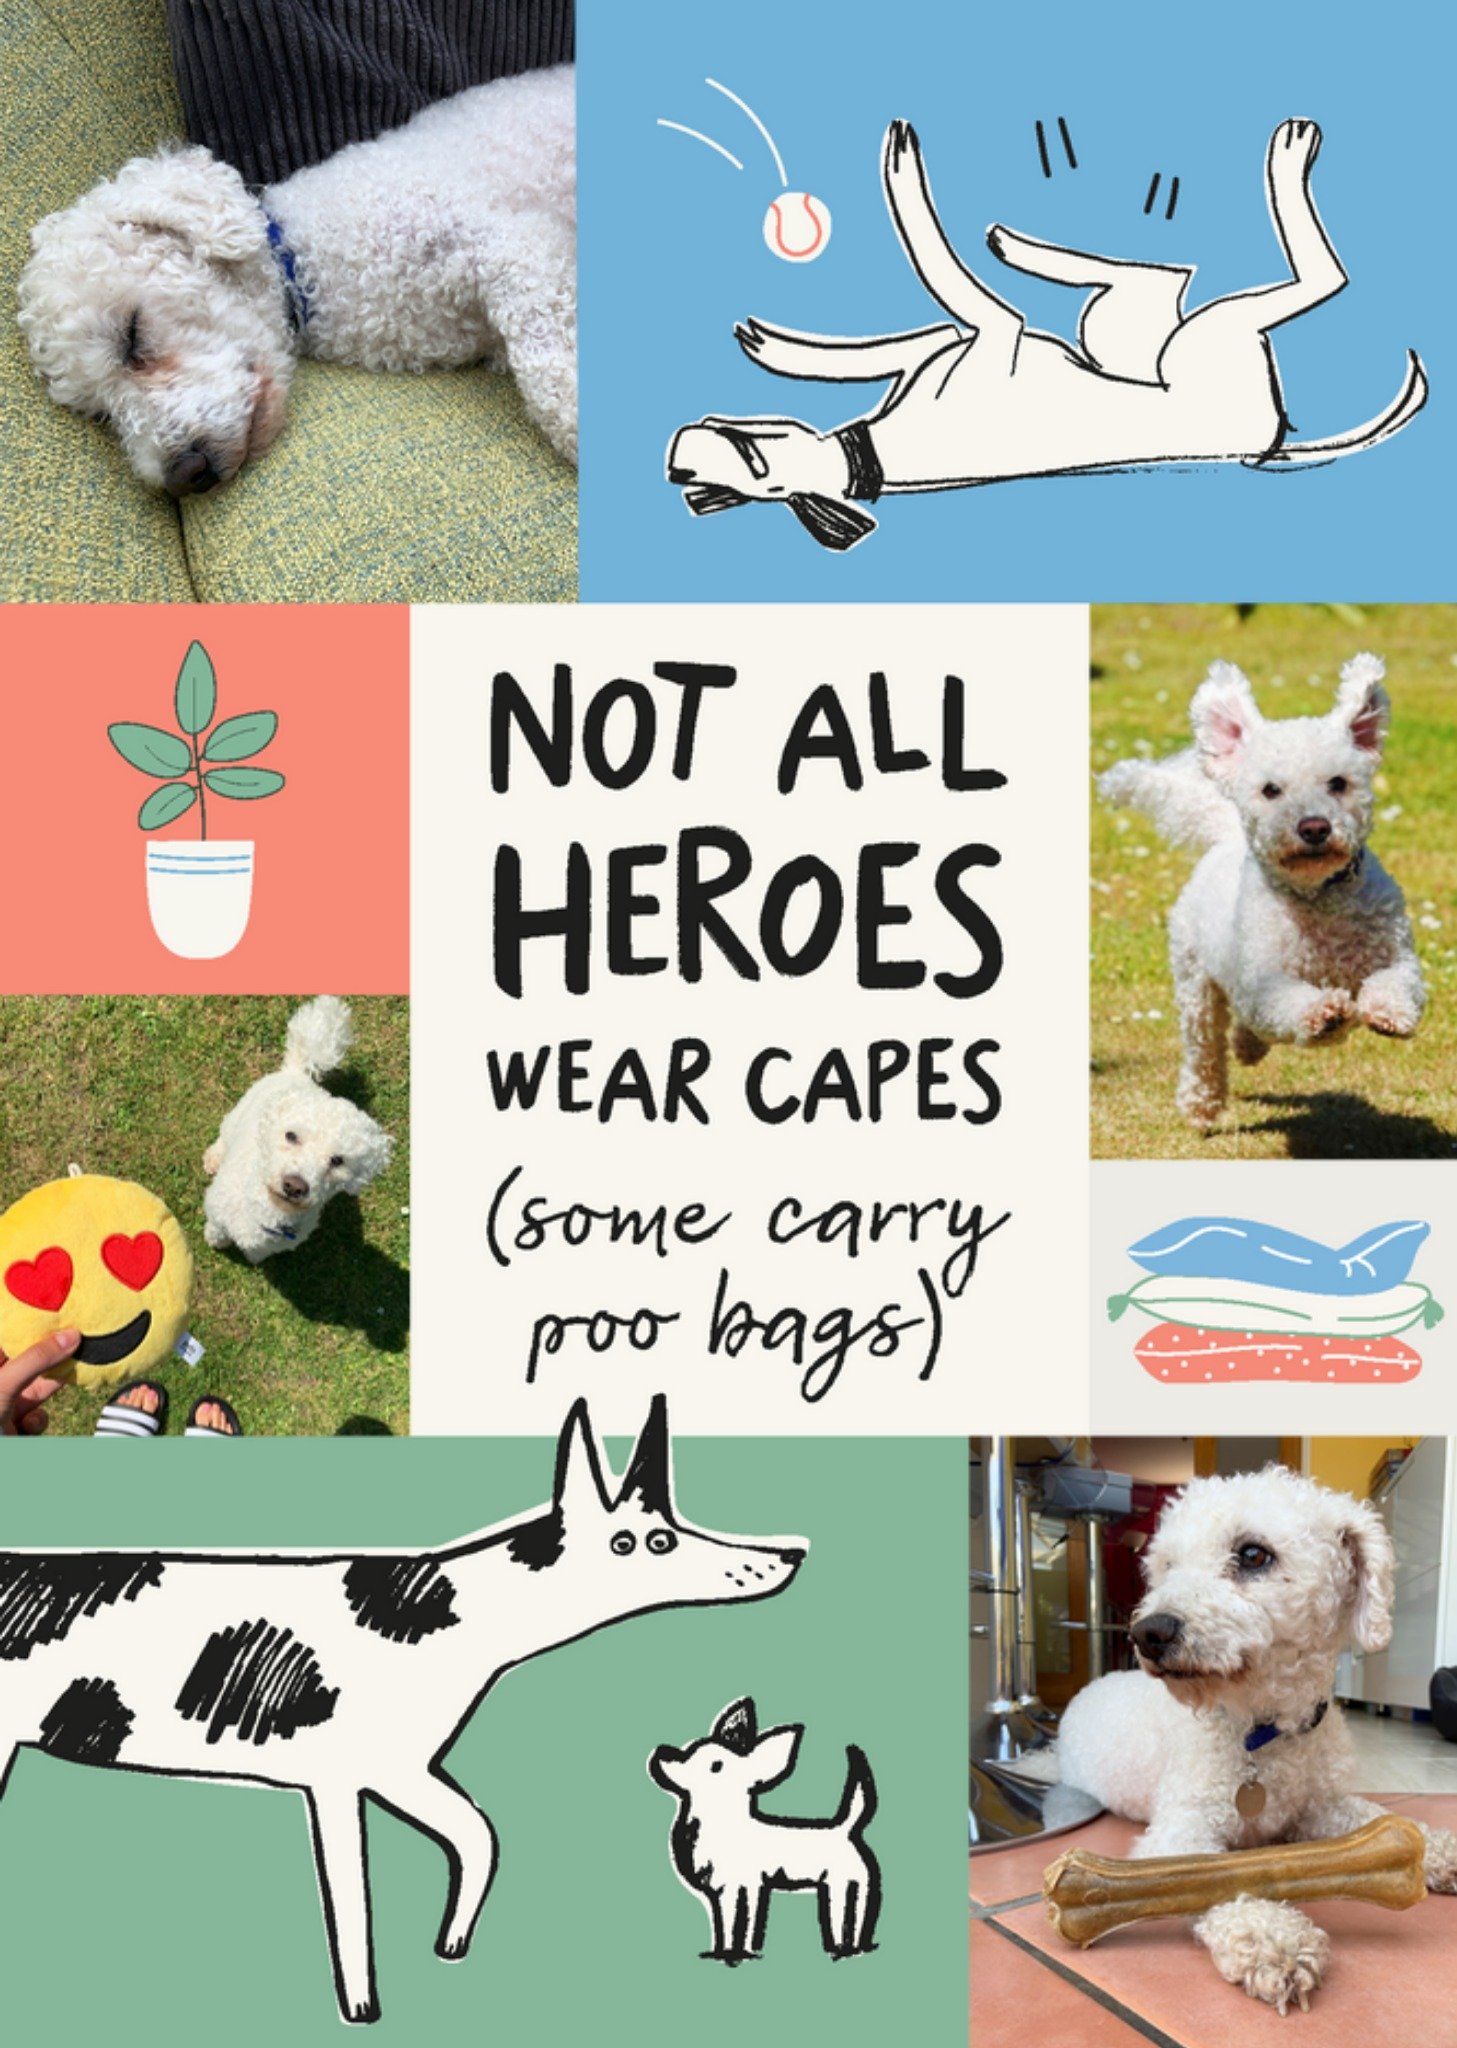 Moonpig Battersea Not All Heroes Wear Capes Cute Illustrated Dogs Photo Upload Card Ecard